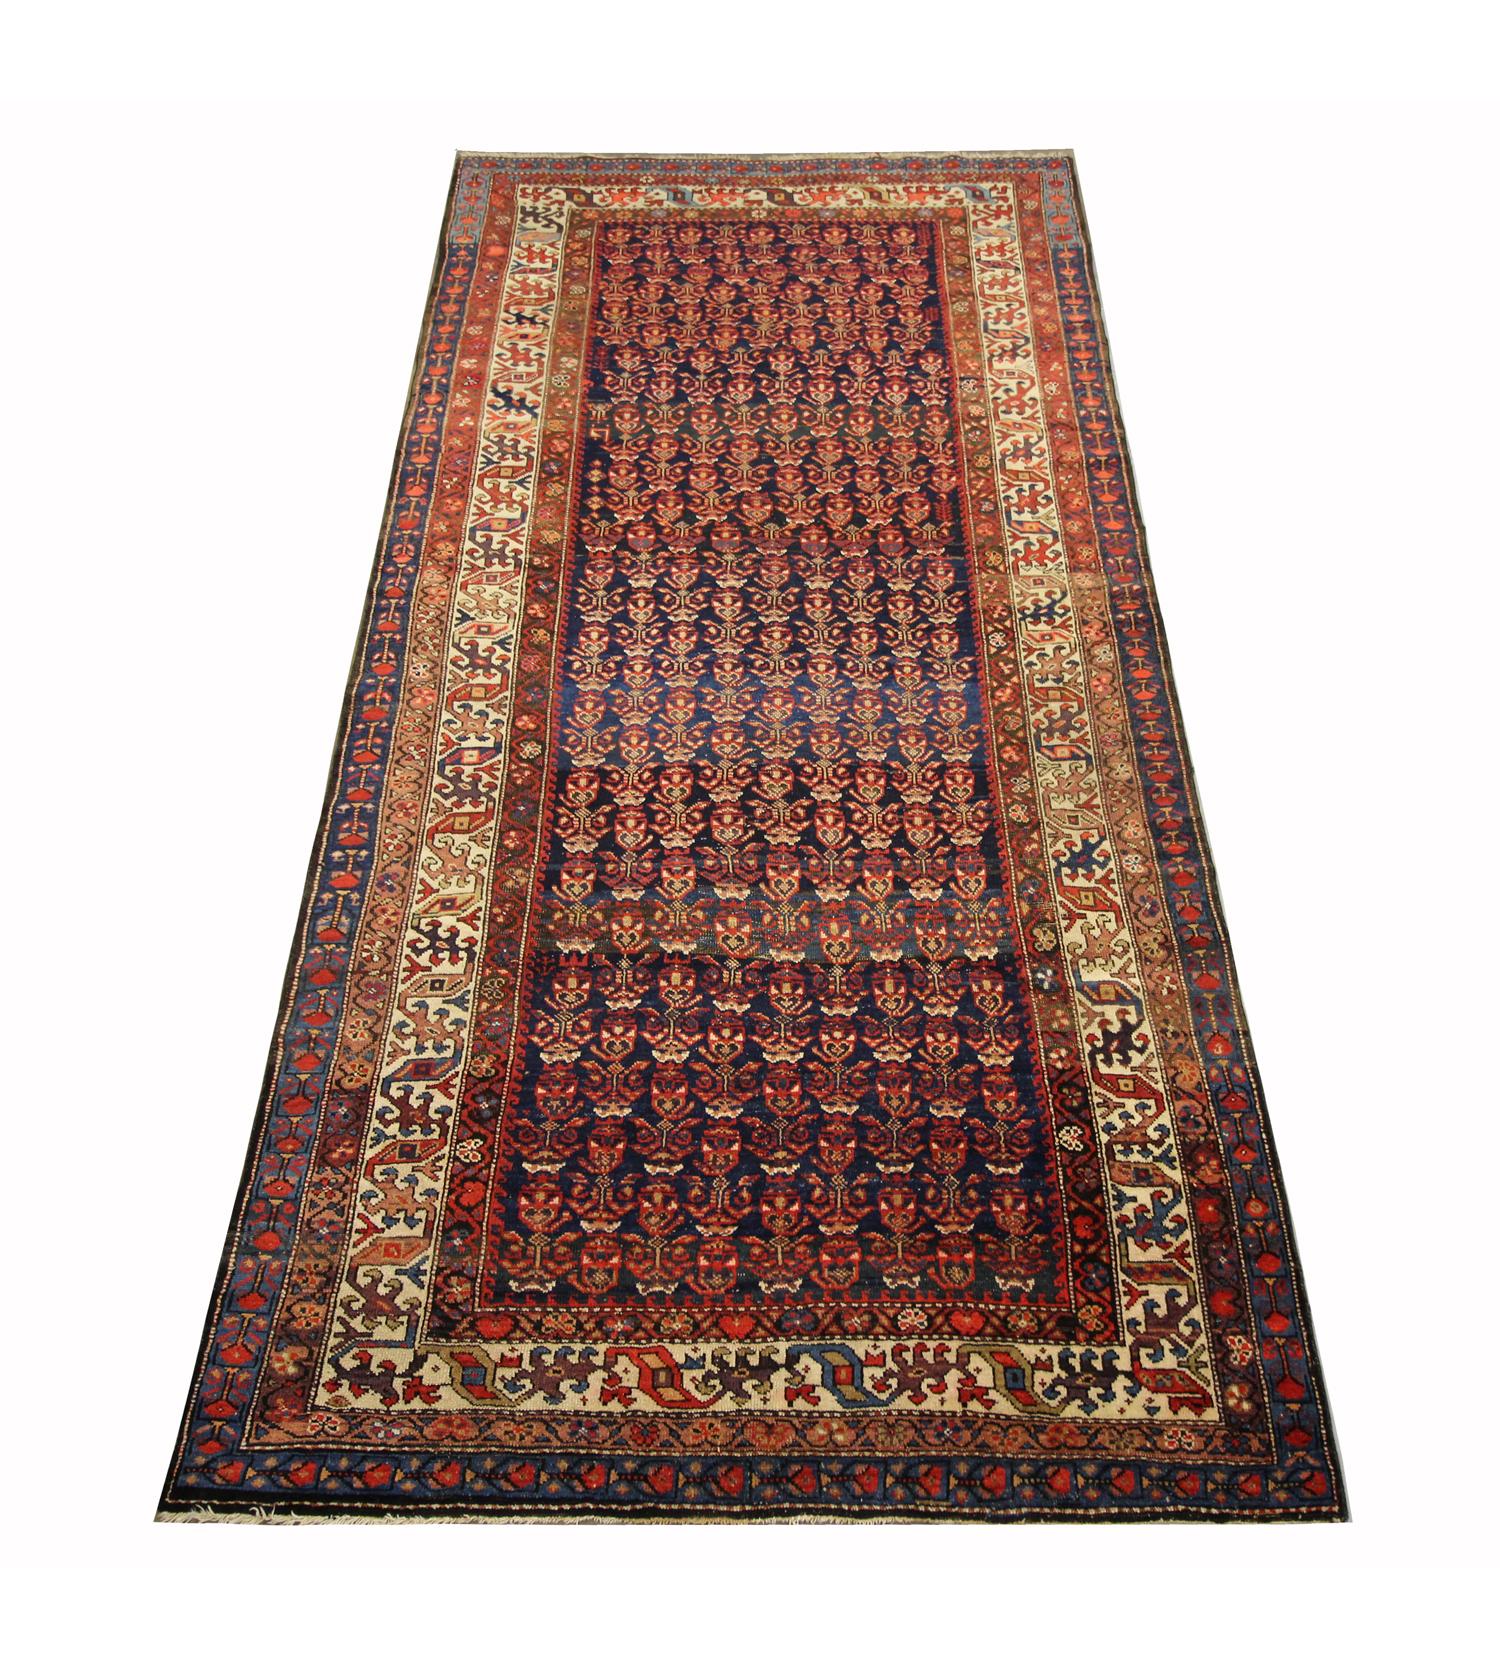 This fine wool area rug was handwoven in Azerbaijan in 1880. The central design features a bold, intricate design woven with a repeating all over pattern through the centre and a traditional layered repeating pattern design border. Both the colour